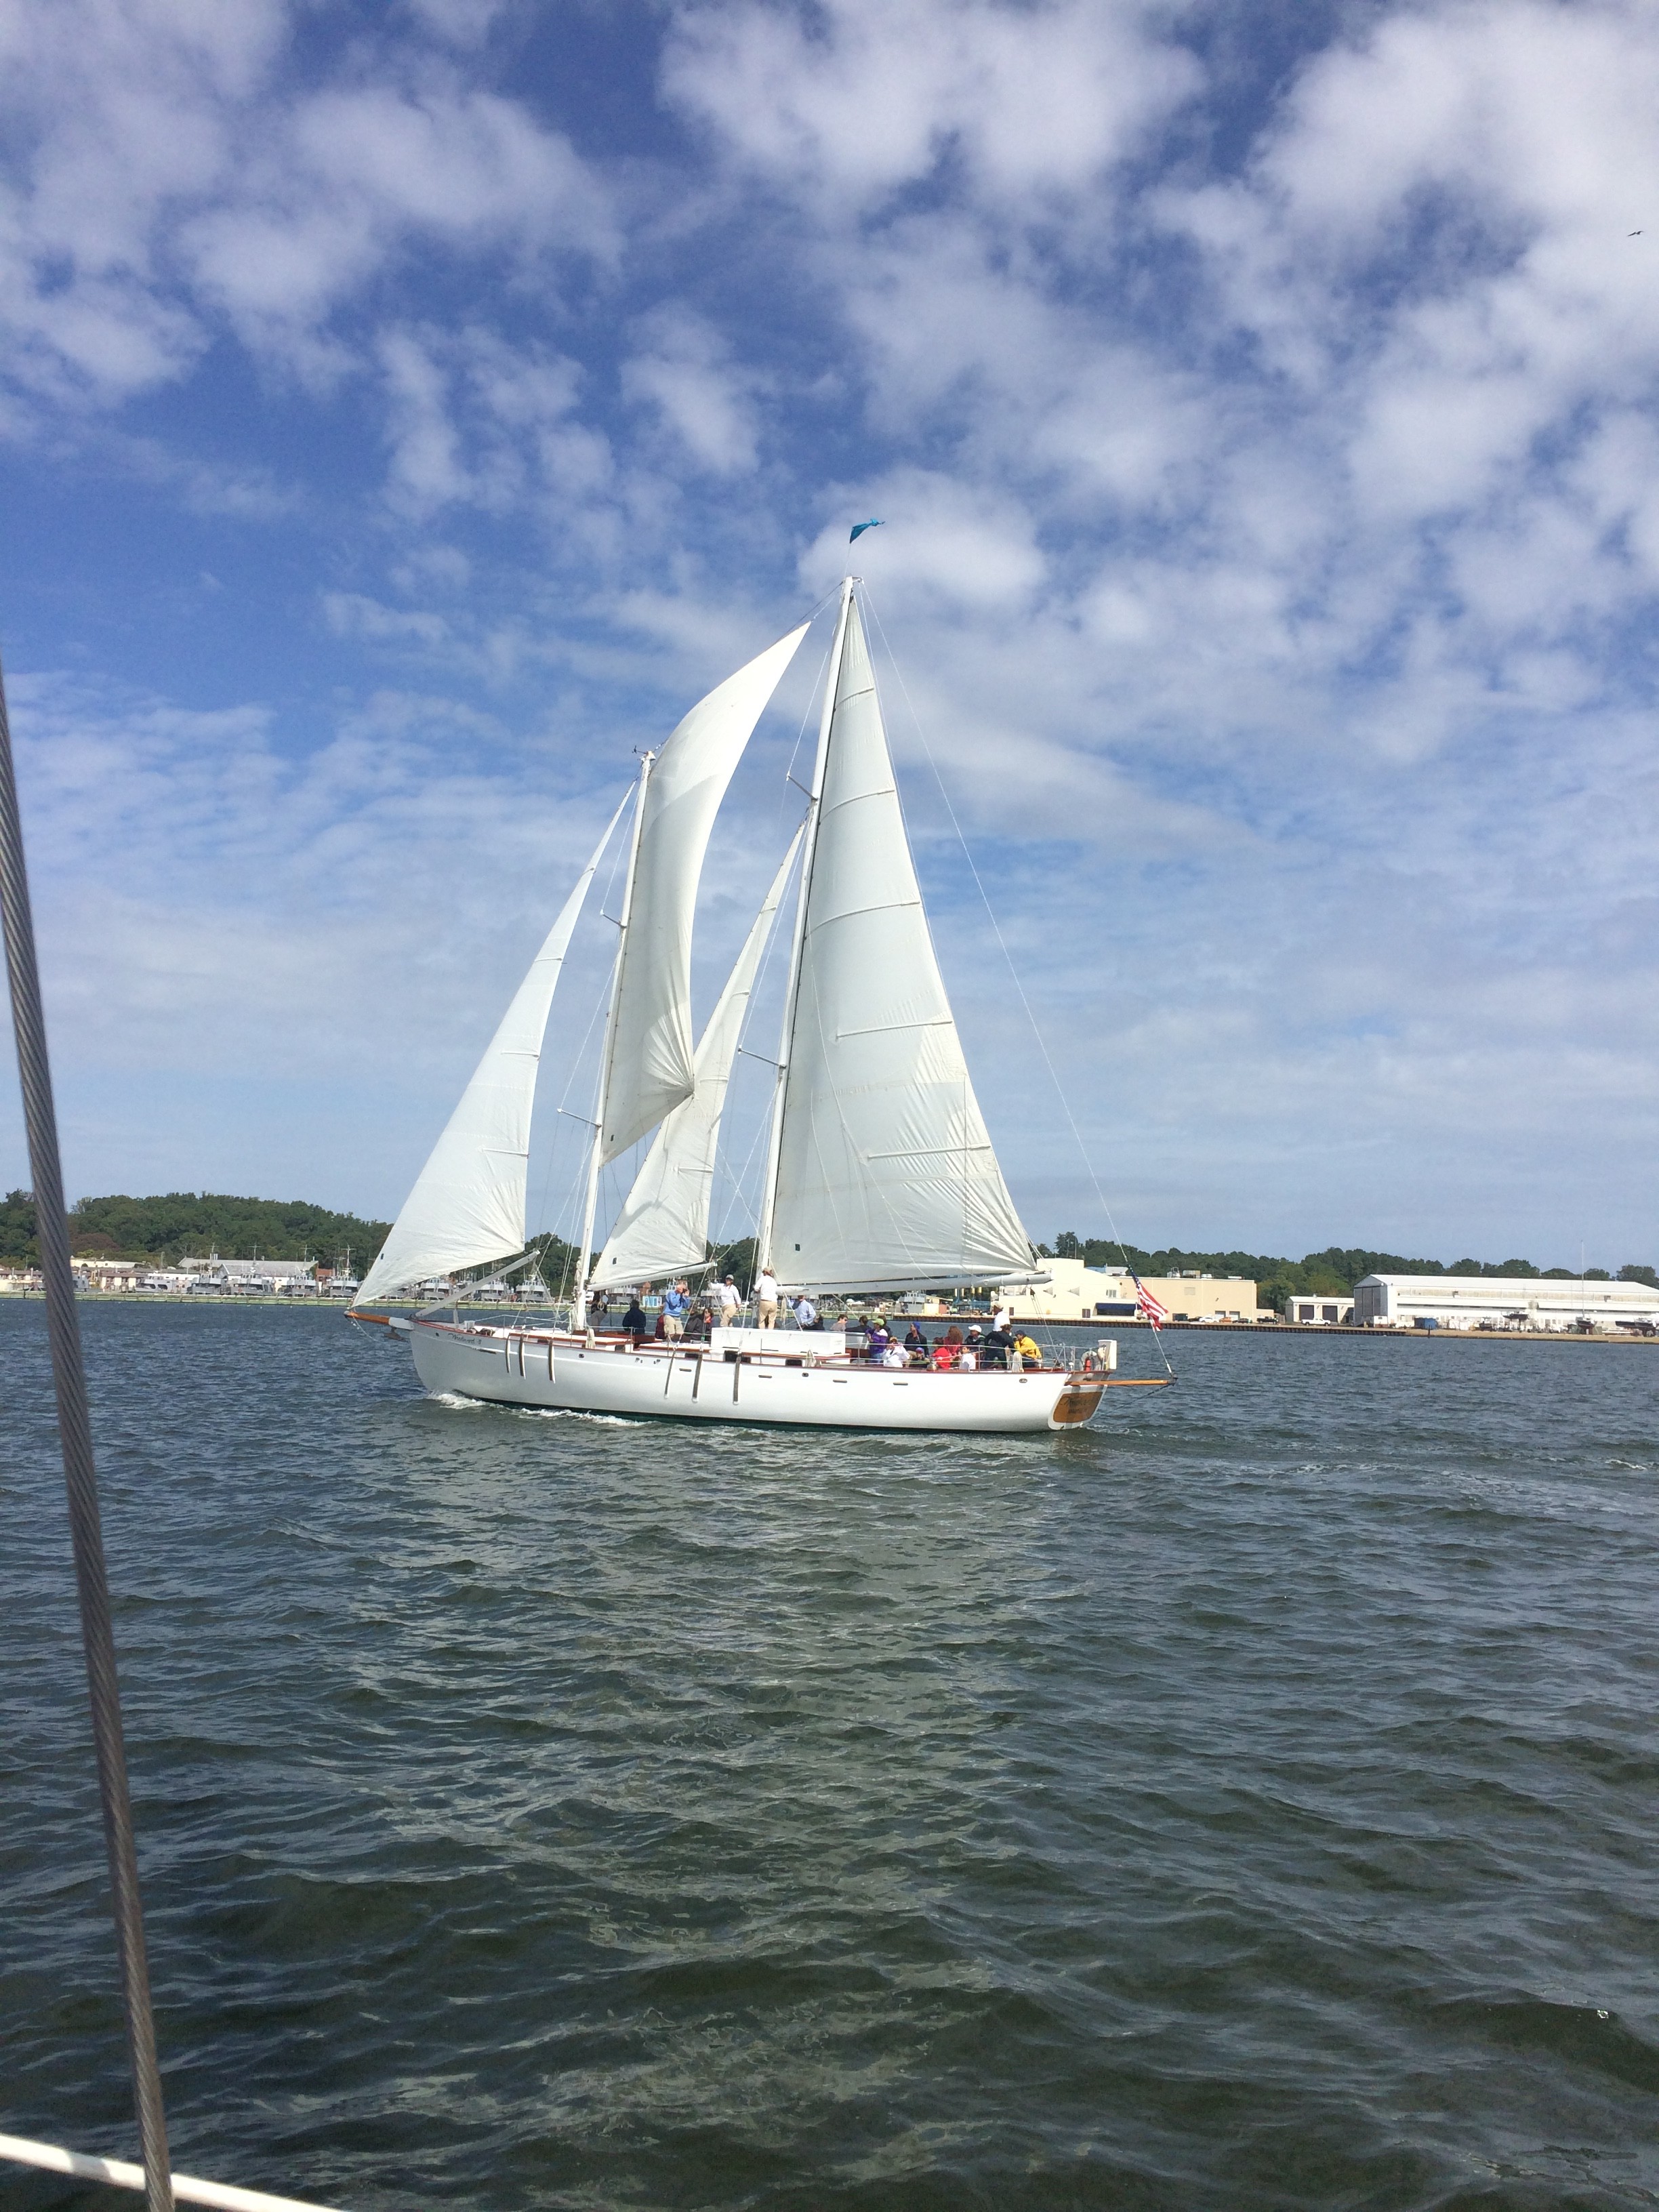 Schooner sailing on blue water with blue sky and white clouds